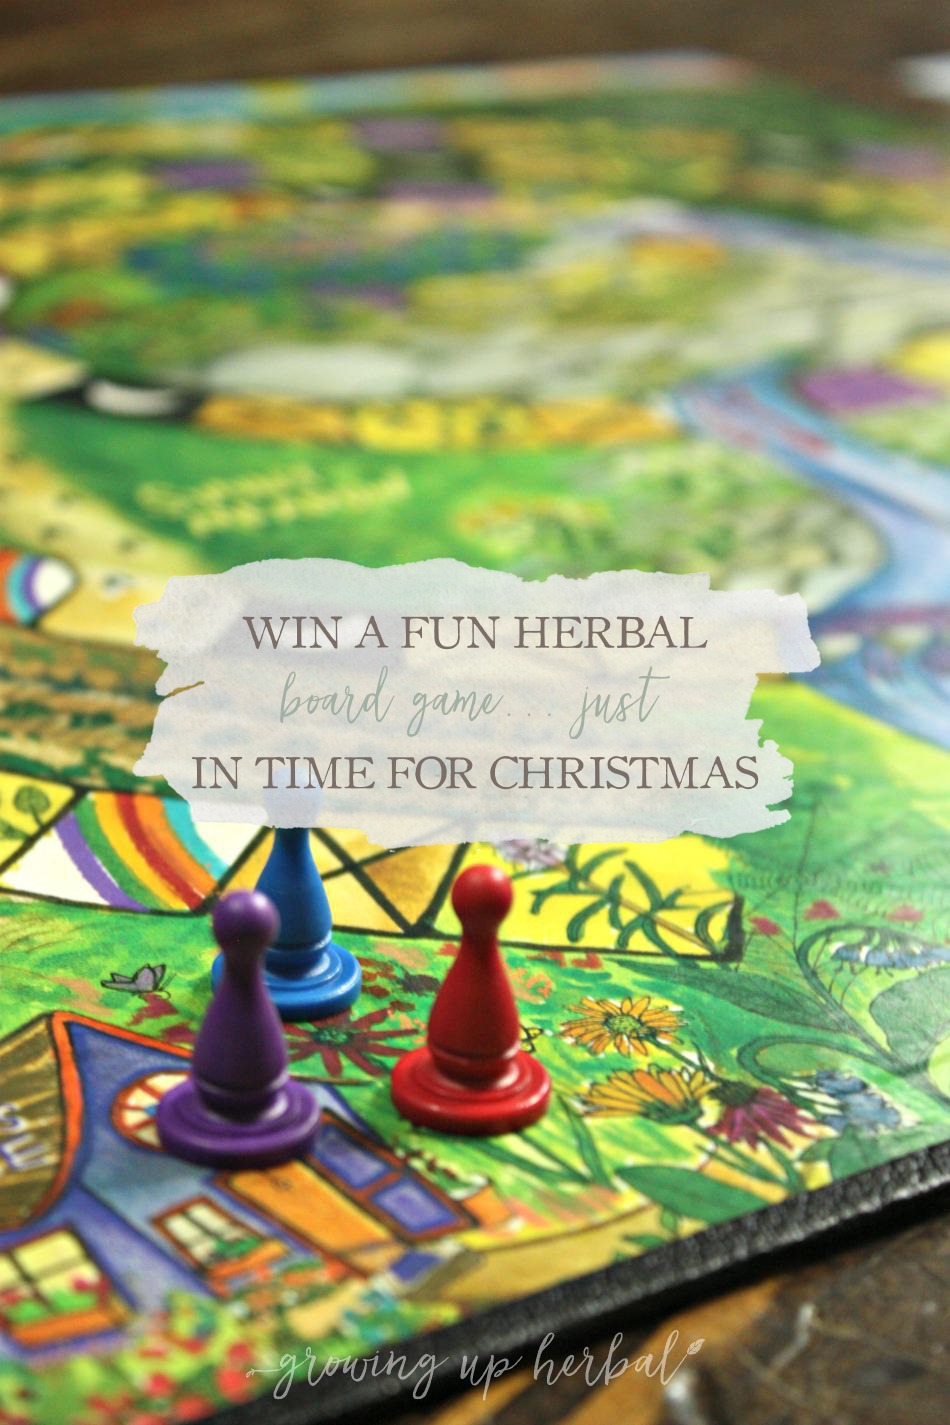 A Fun Herbal Board Game... Just In Time For Christmas! | Growing Up Herbal | Enter to win a free herbal board game, Wildcraft, just in time for Christmas!